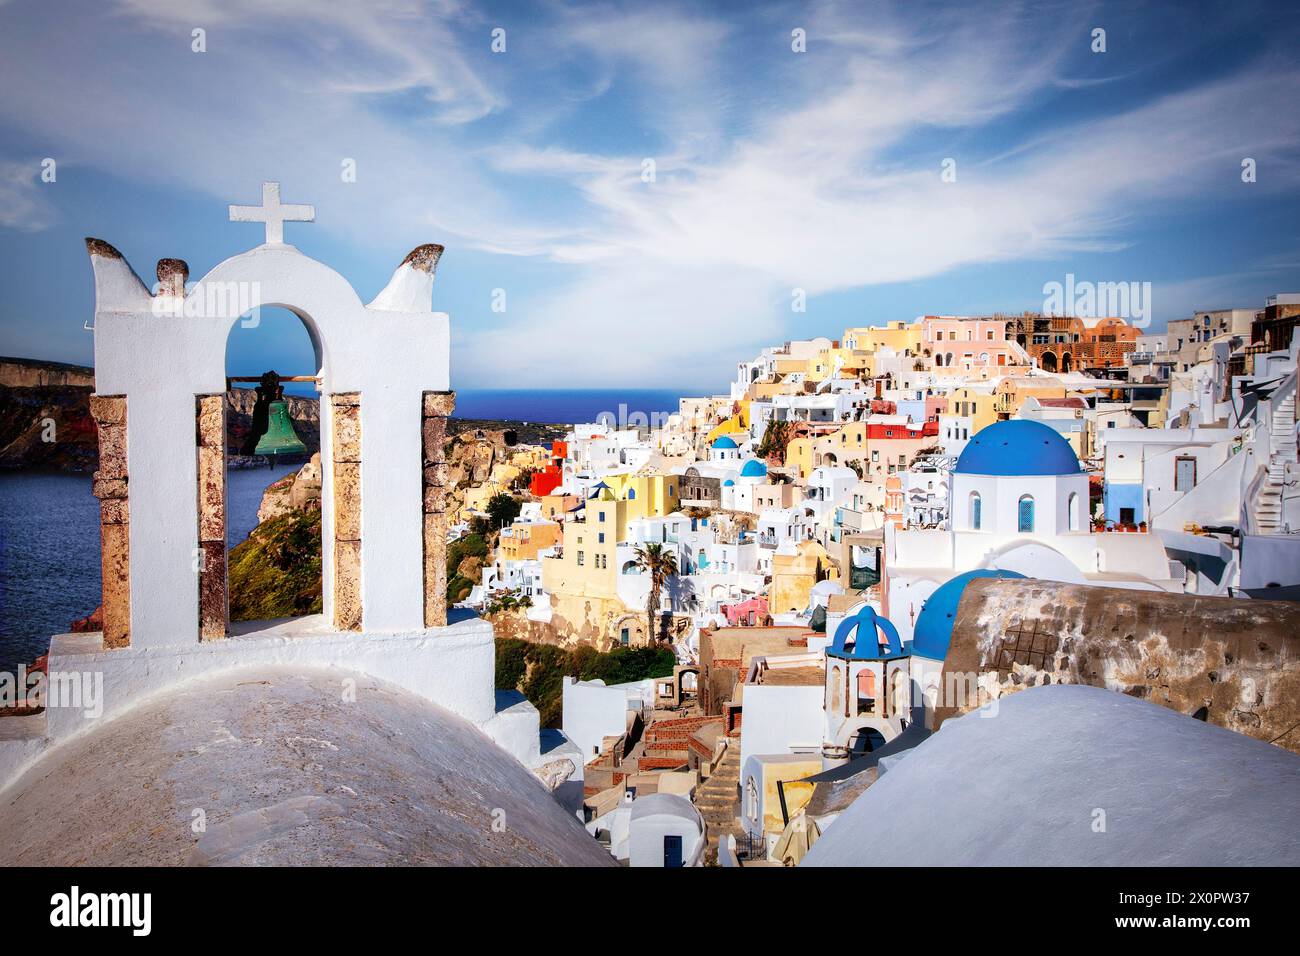 The village of Oia built on the cliff of the caldera on the island of Santorini, Greece. Stock Photo